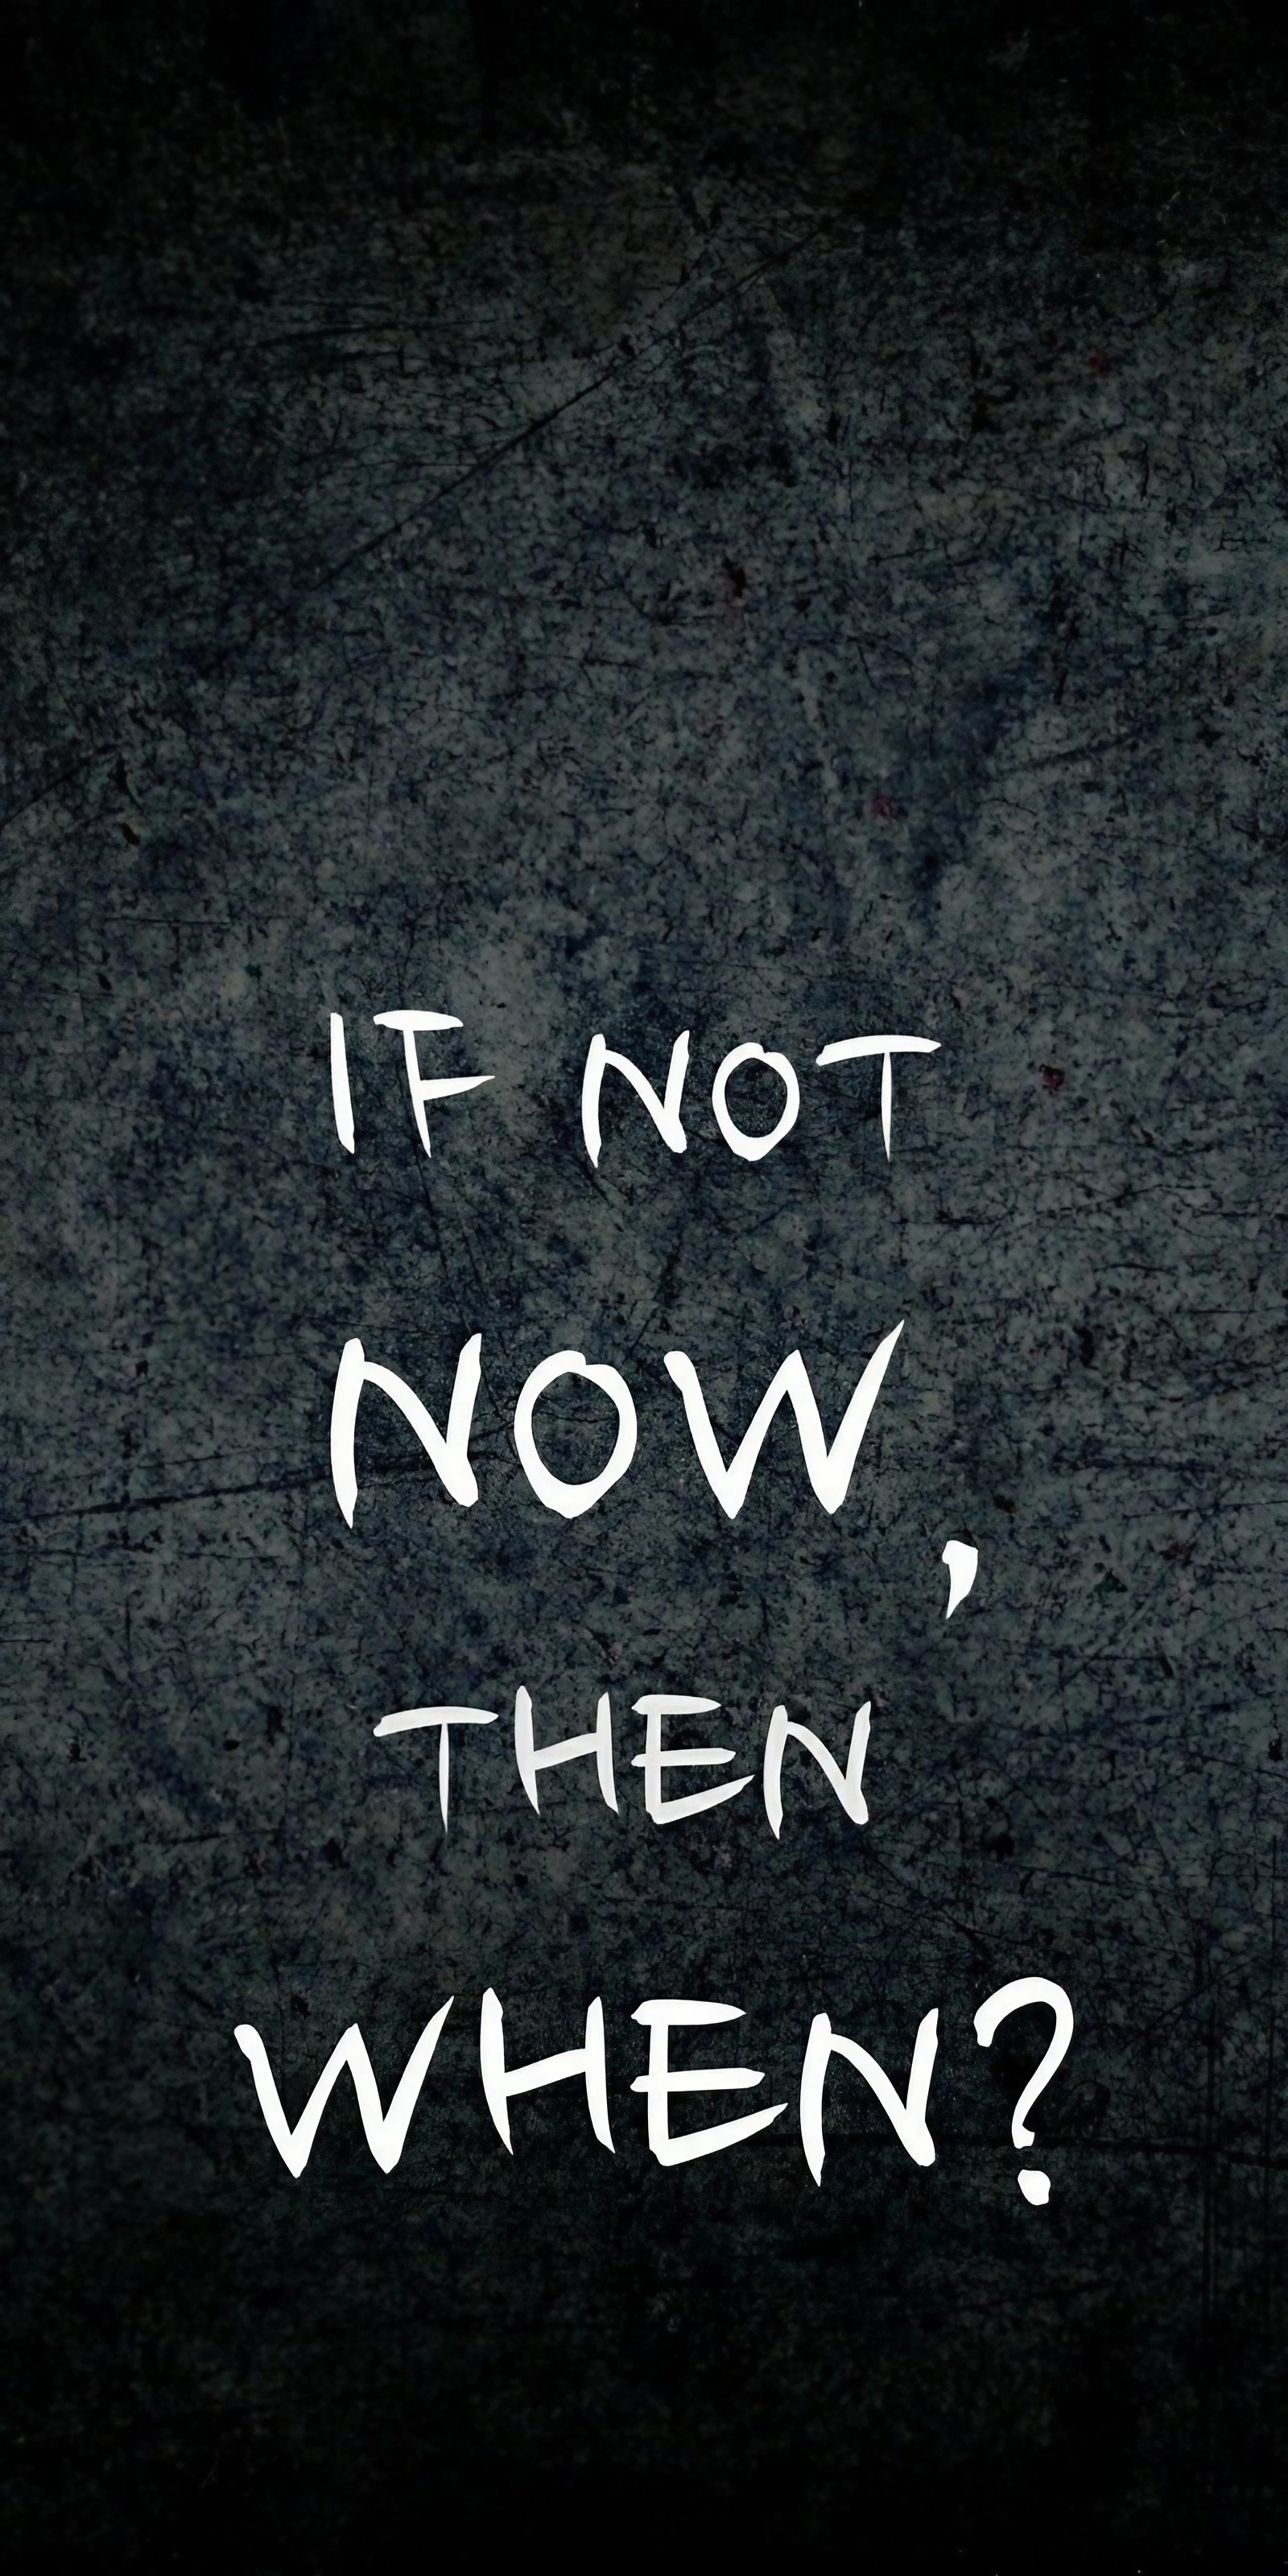 Study Motivation - If Not Now Then When